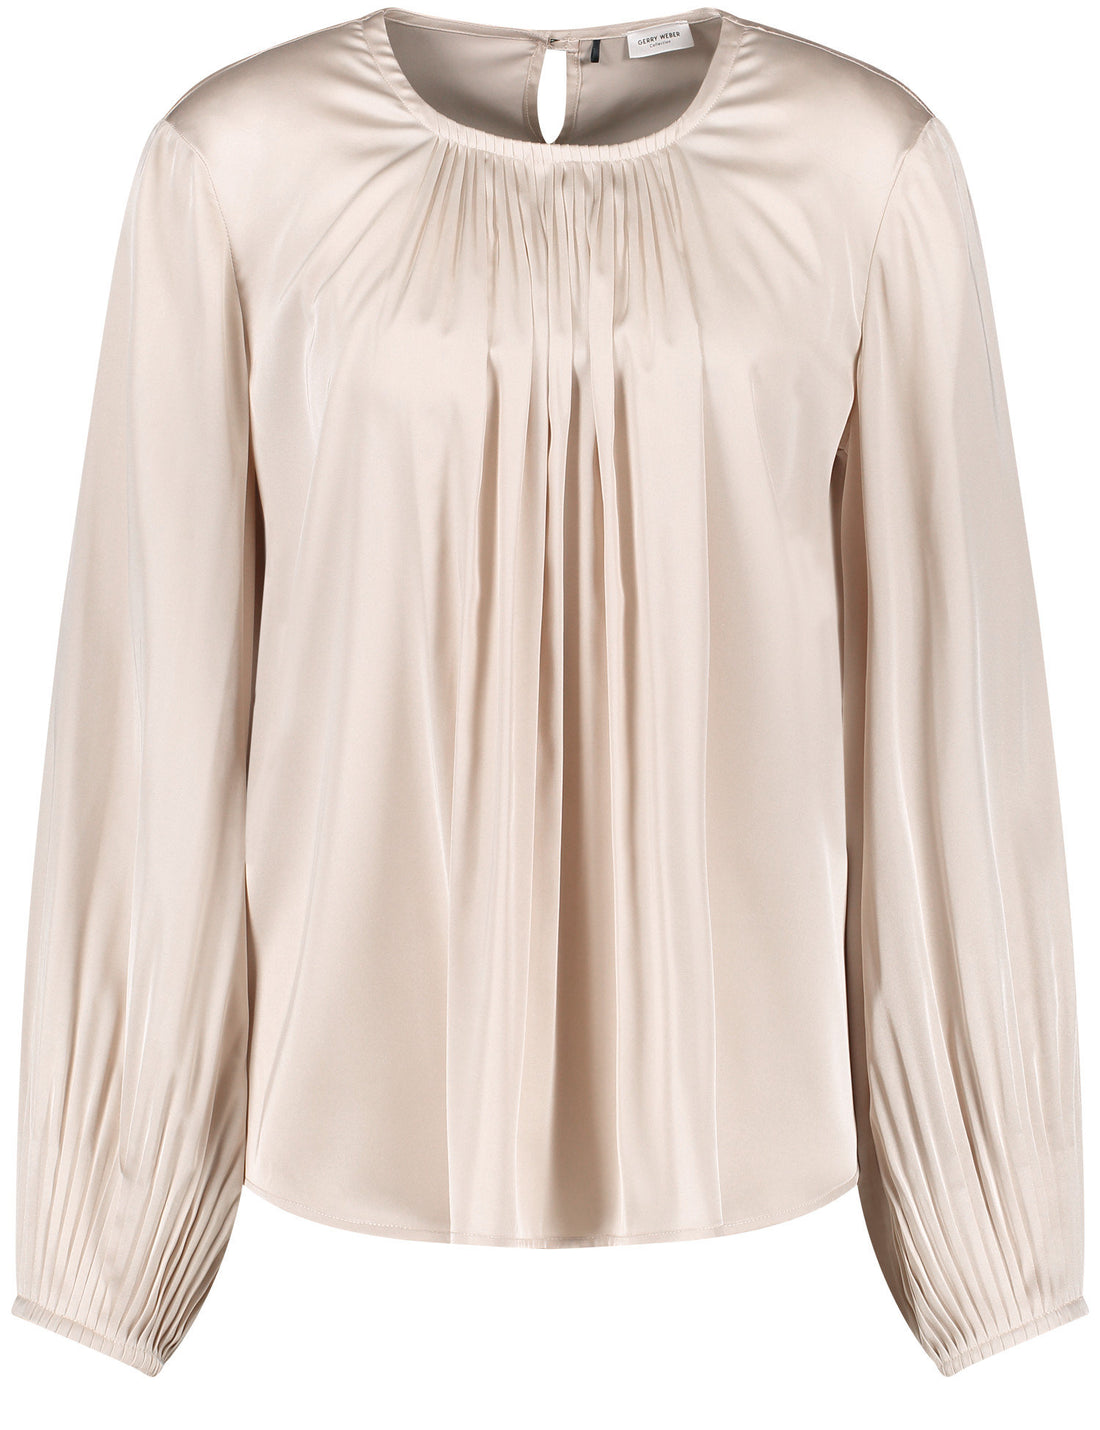 Flowing Pleated Blouse_260045-31434_90544_01